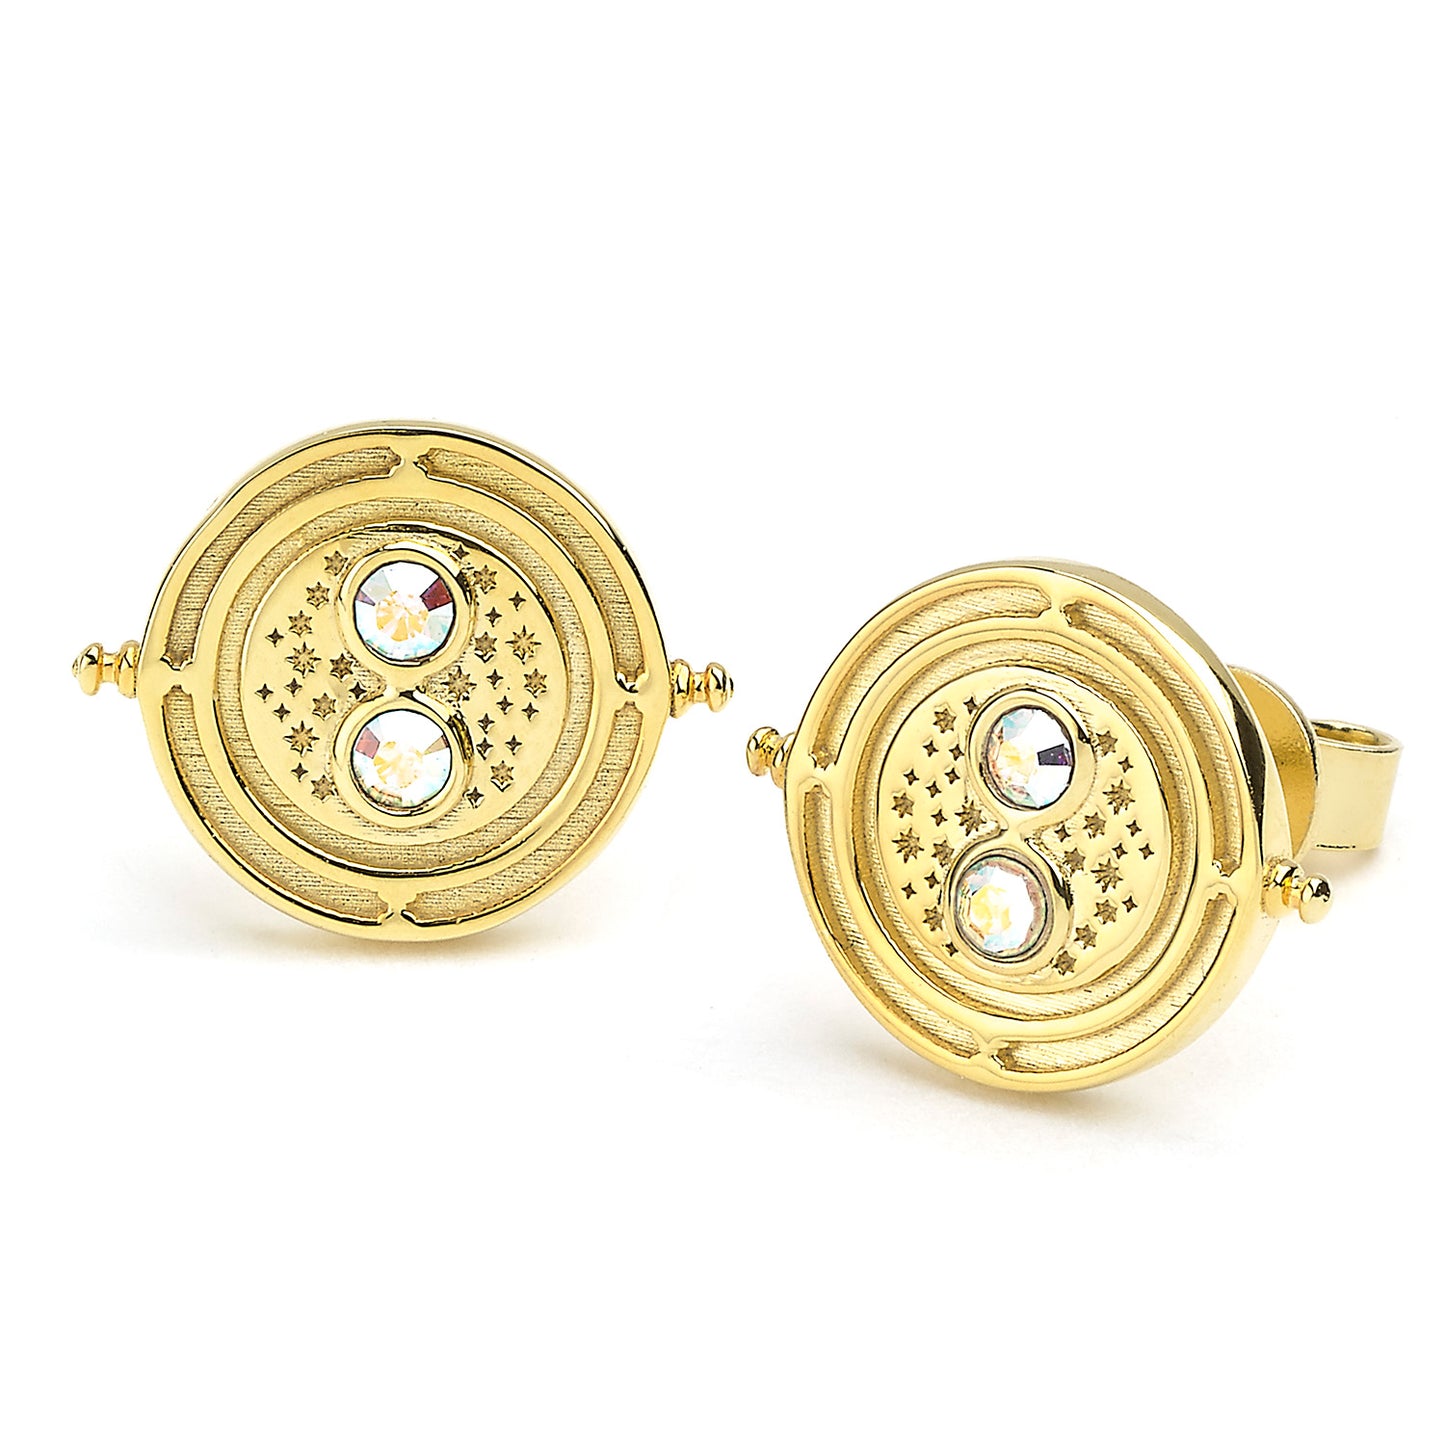 Harry Potter Time Turner Stud Earring Embellished with Crystals - Gold Plated Sterling Silver